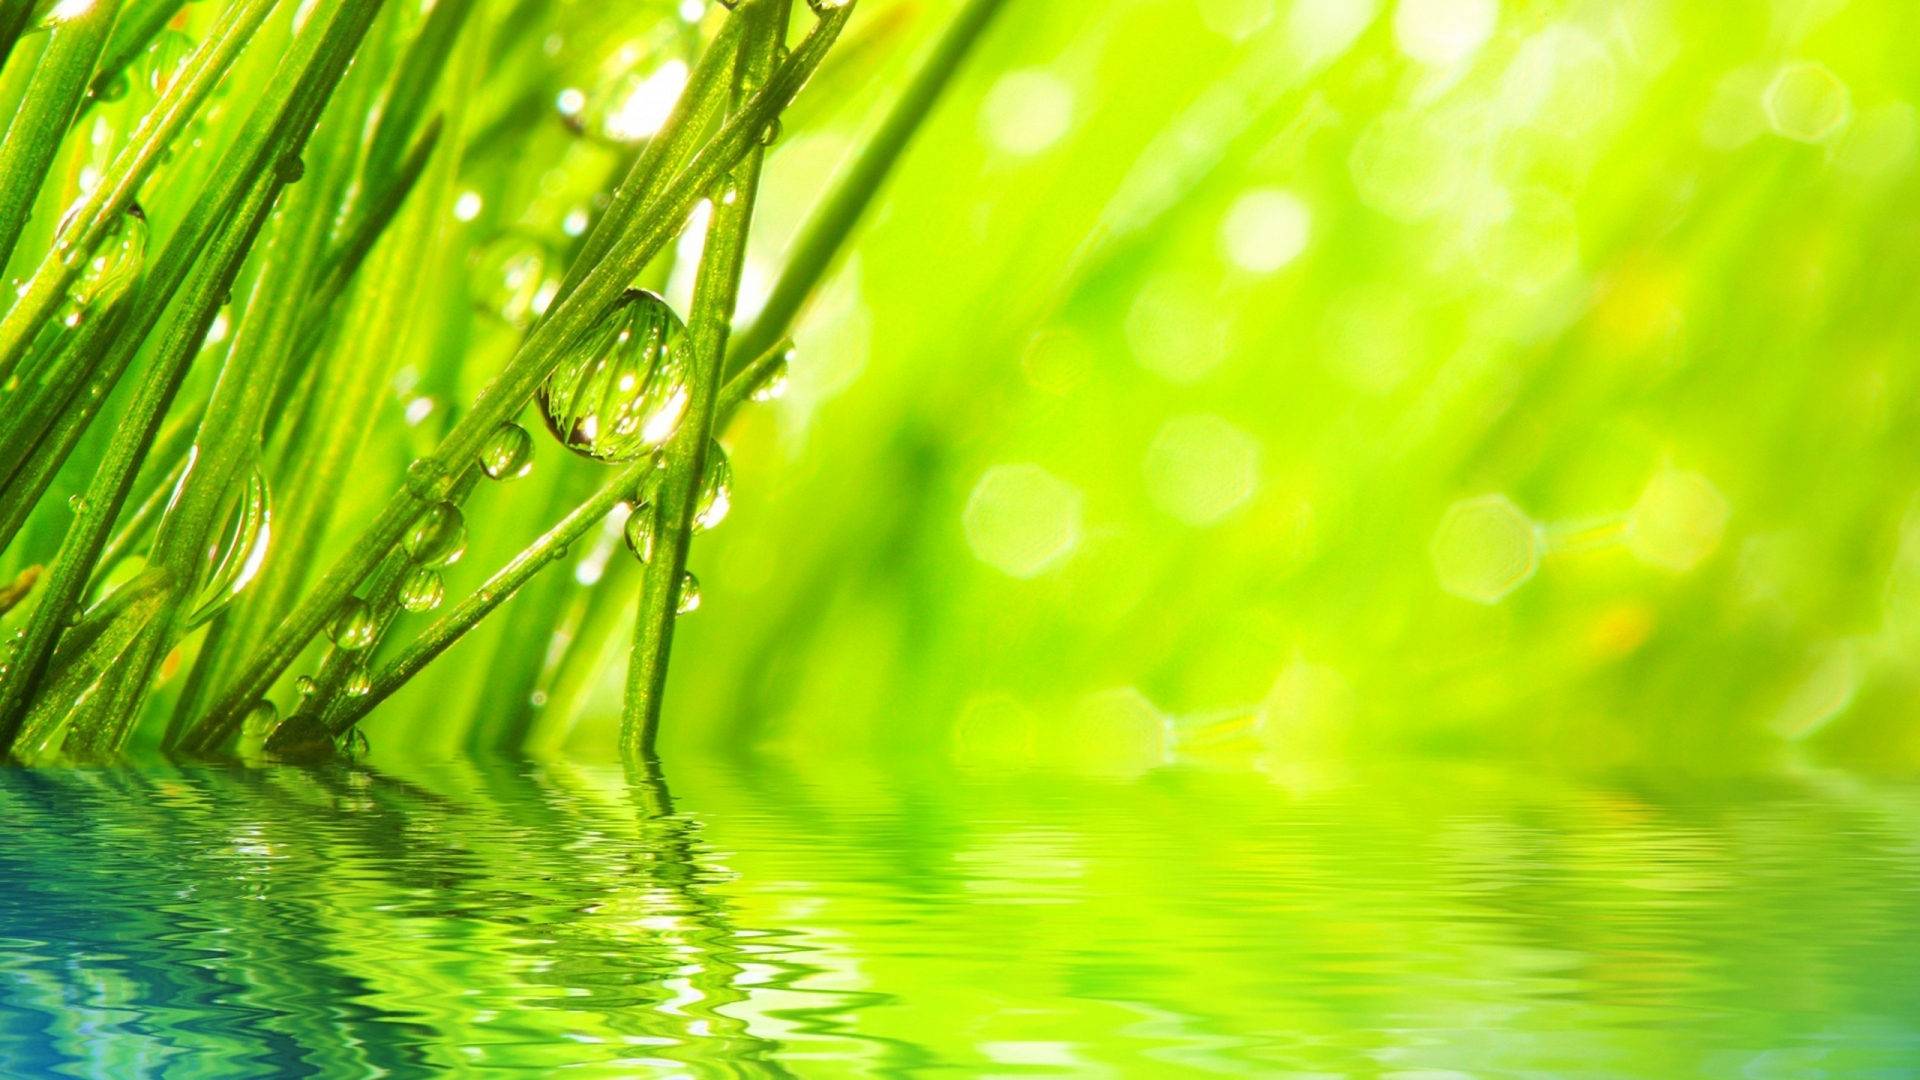 Water Drops on Grass for 1920 x 1080 HDTV 1080p resolution